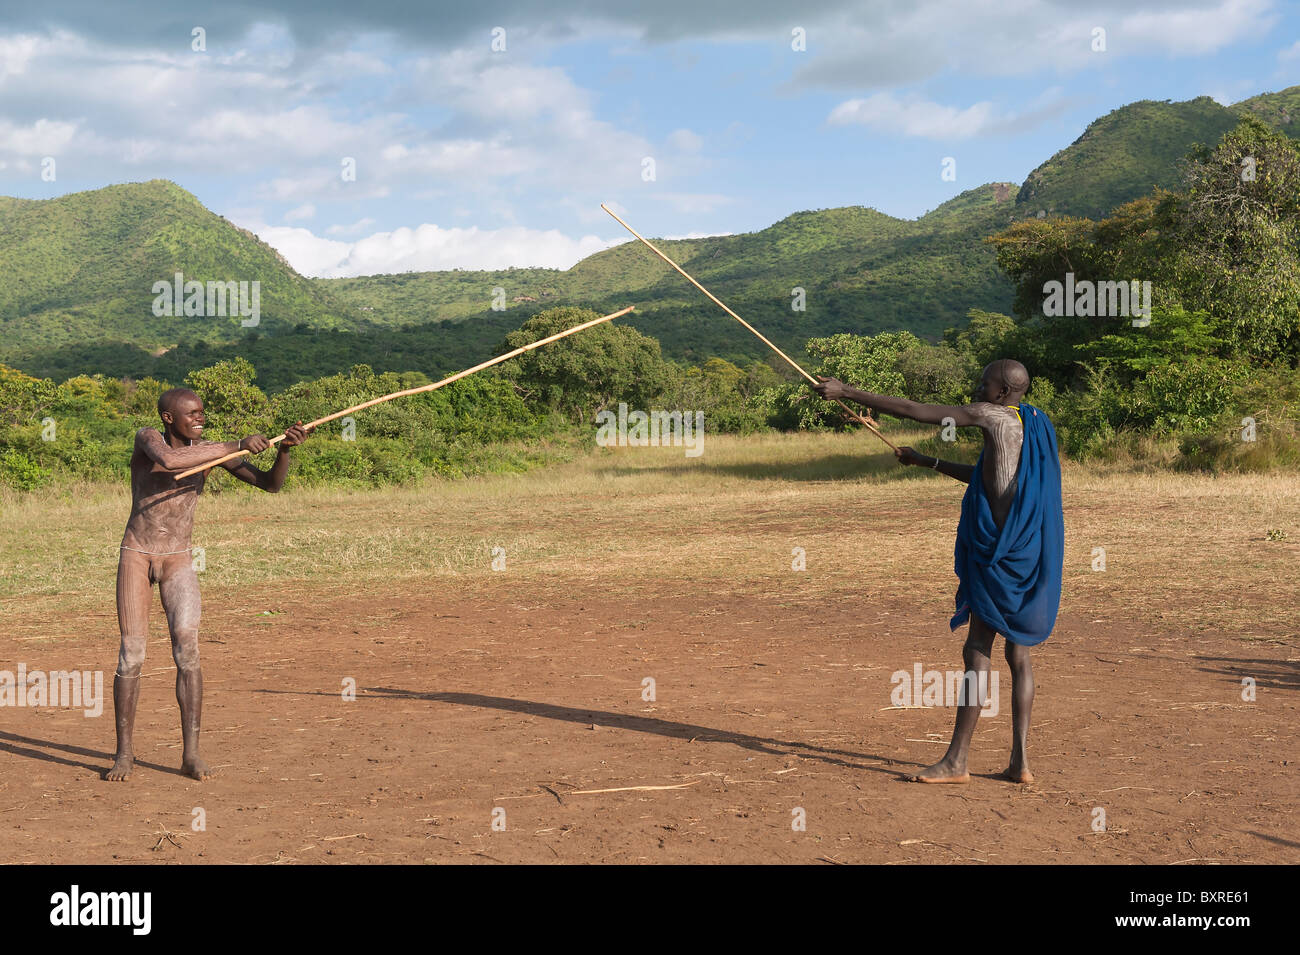 Donga stick fighters, Surma tribe, Tulgit, Omo river valley, Ethiopia Africa Stock Photo